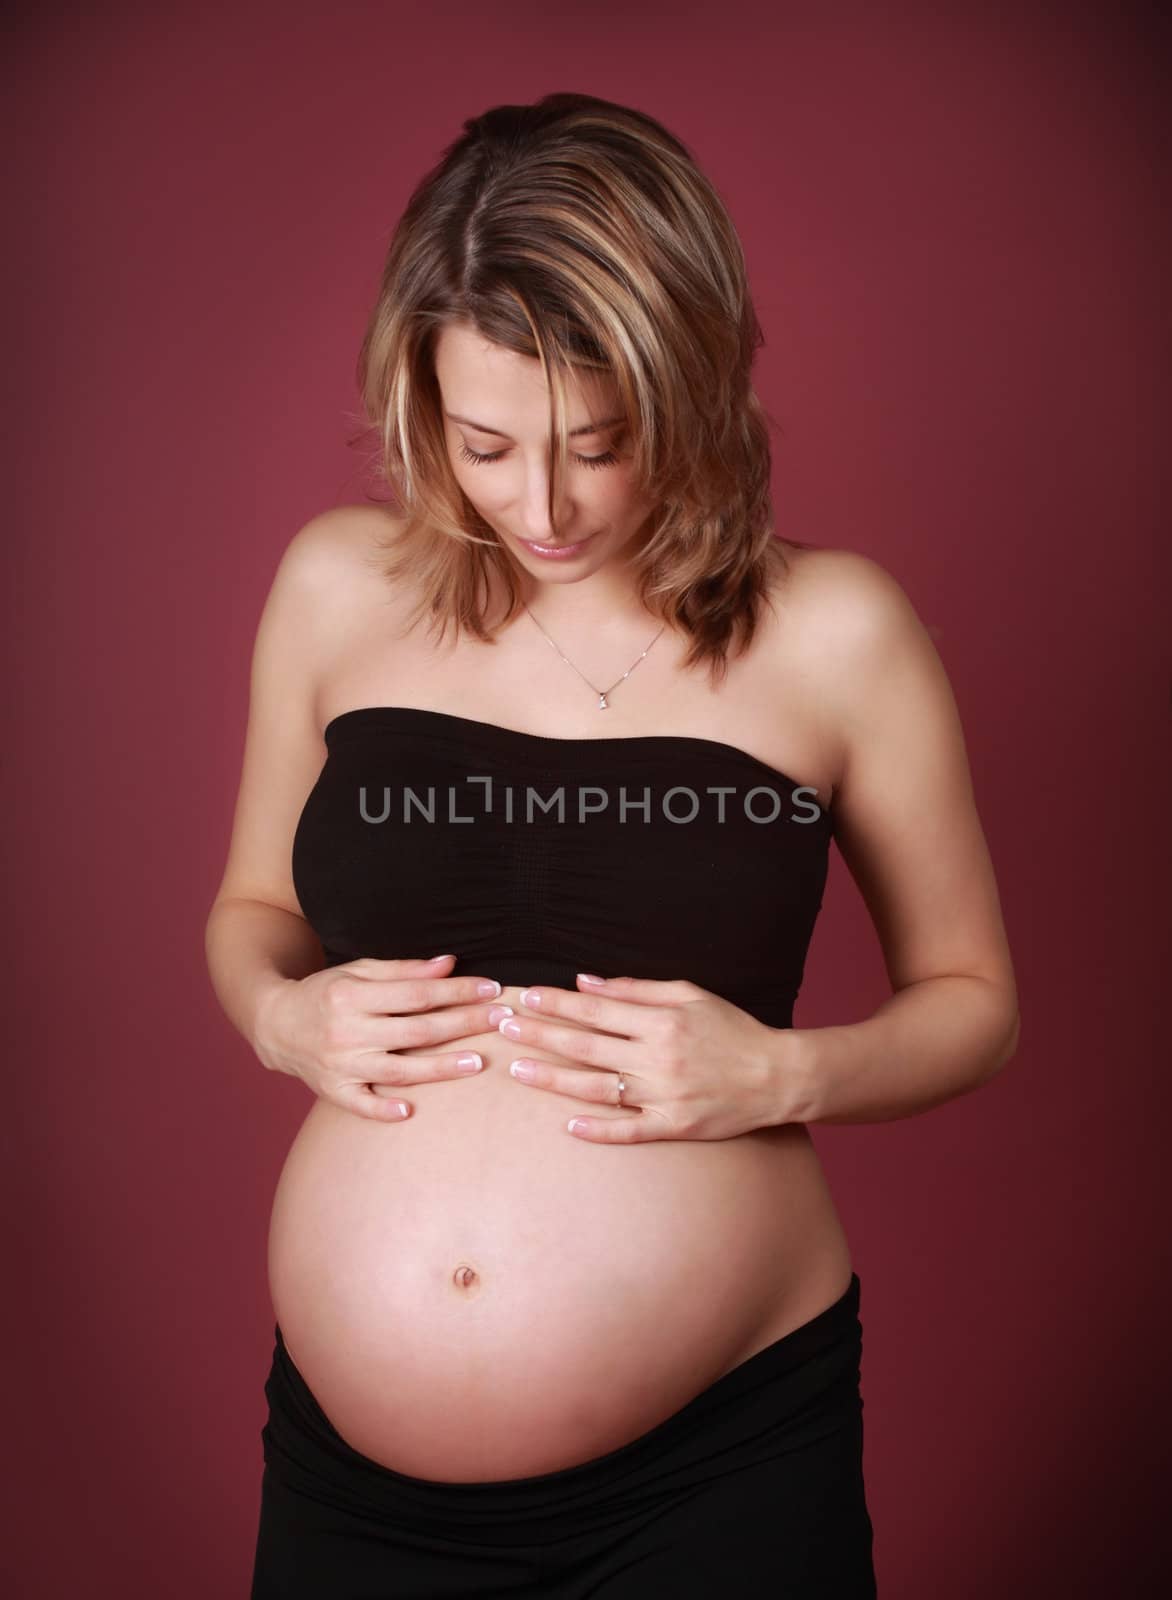 pregnant woman by lanalanglois